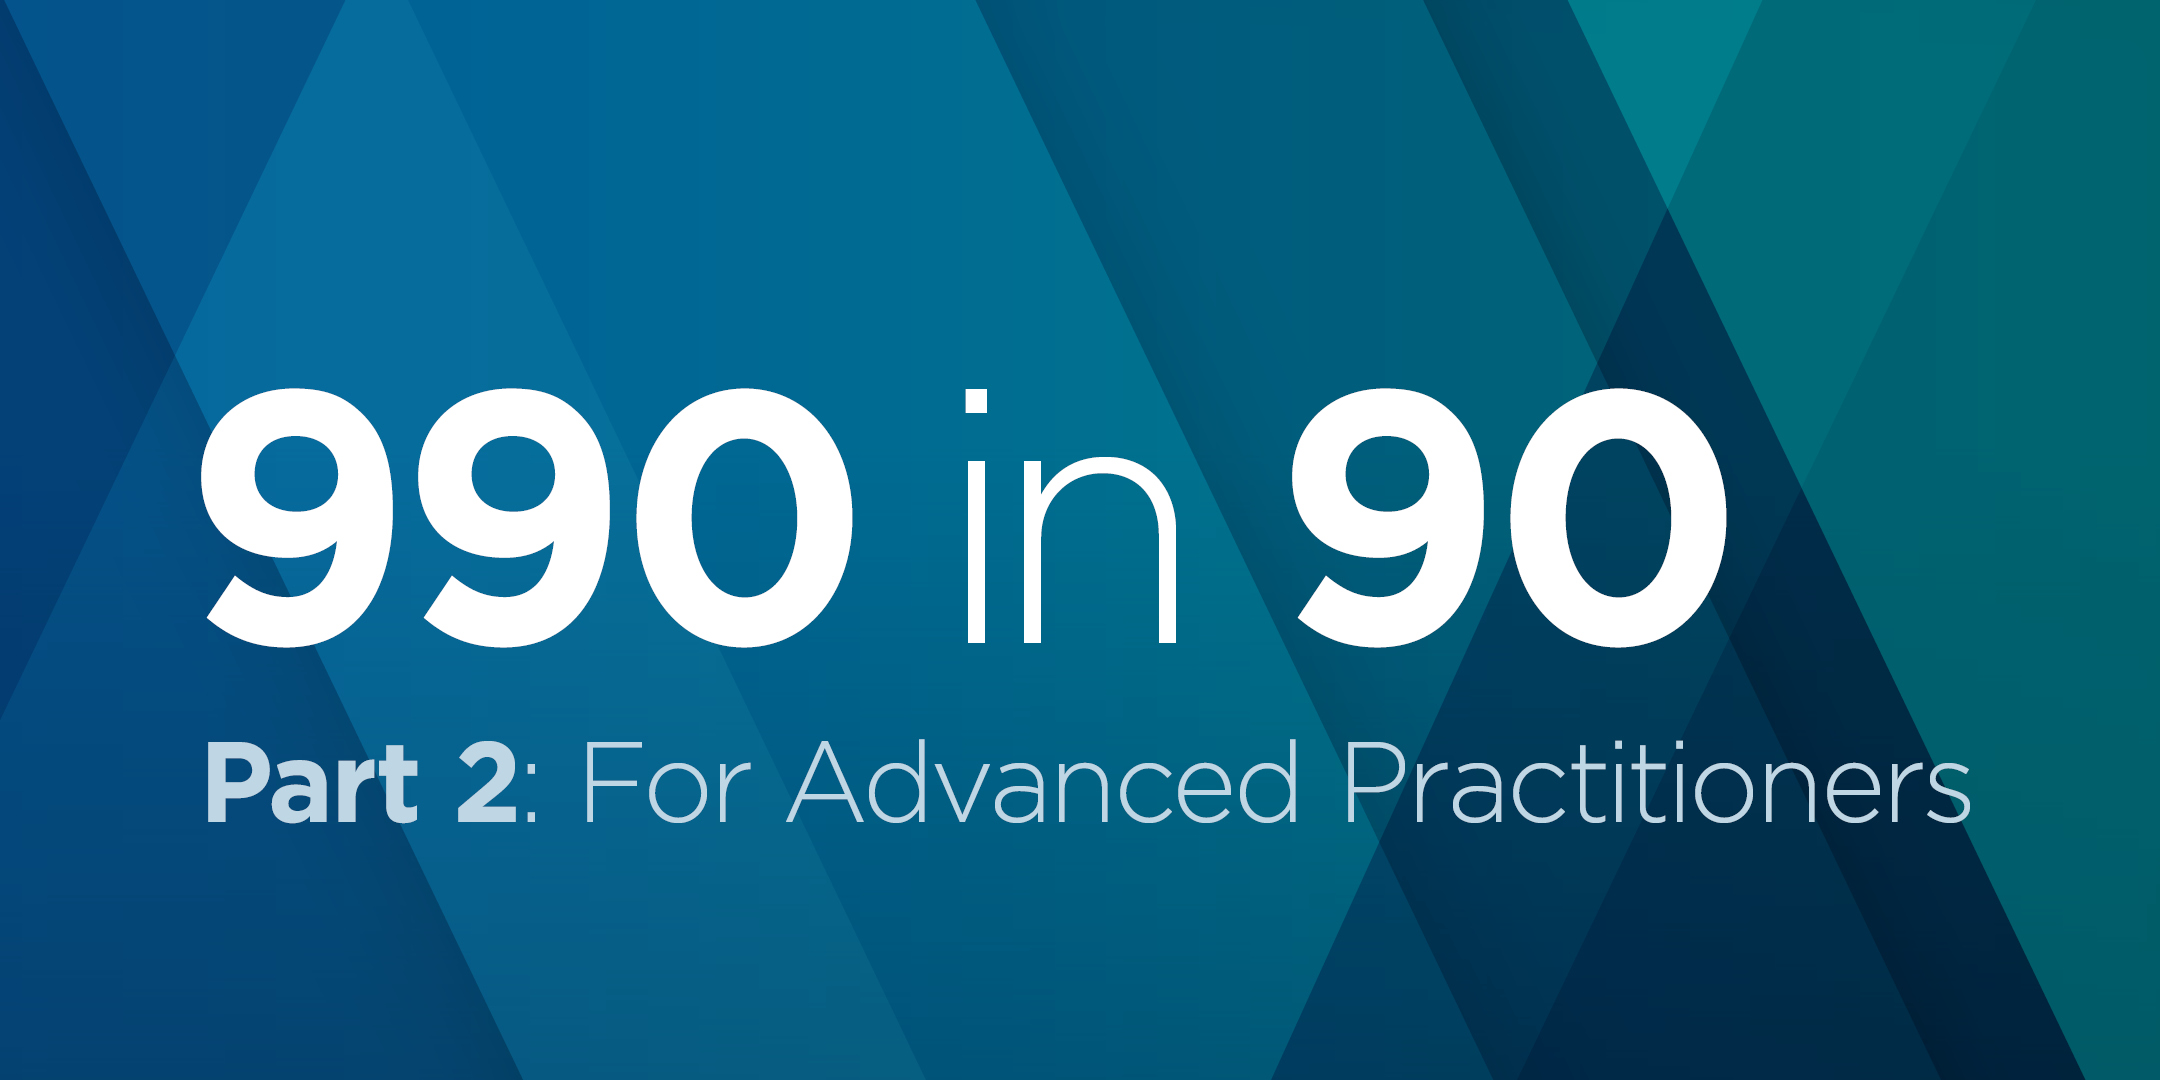 990 in 90 Part 2: For Advanced Practitioners